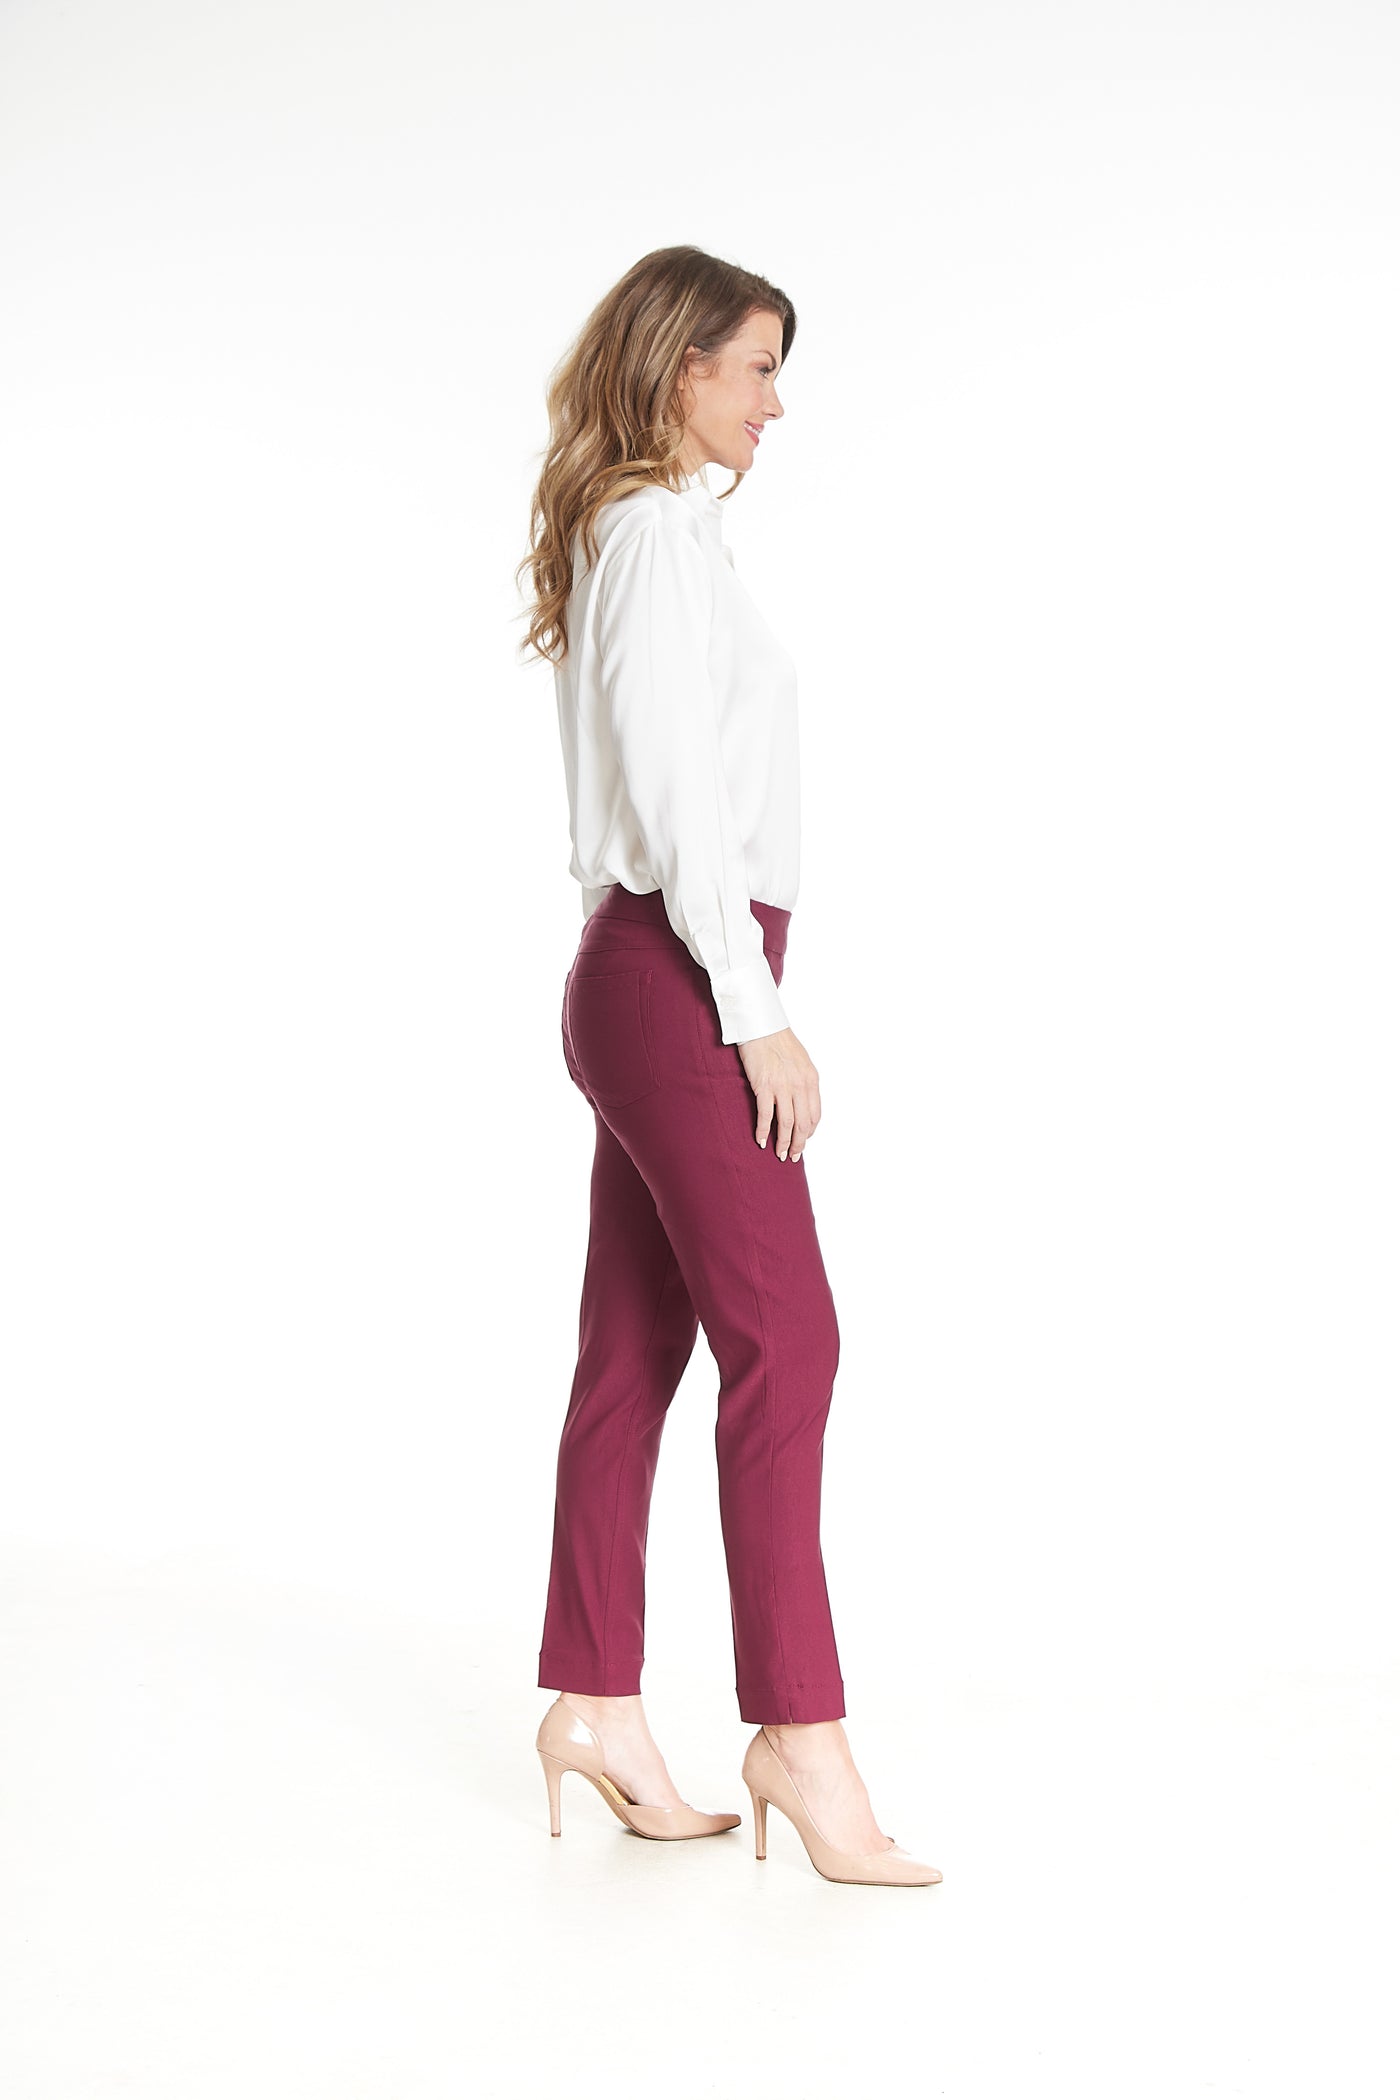 PULL-ON ANKLE PANT WITH REAL FRONT AND BACK POCKETS - Beet